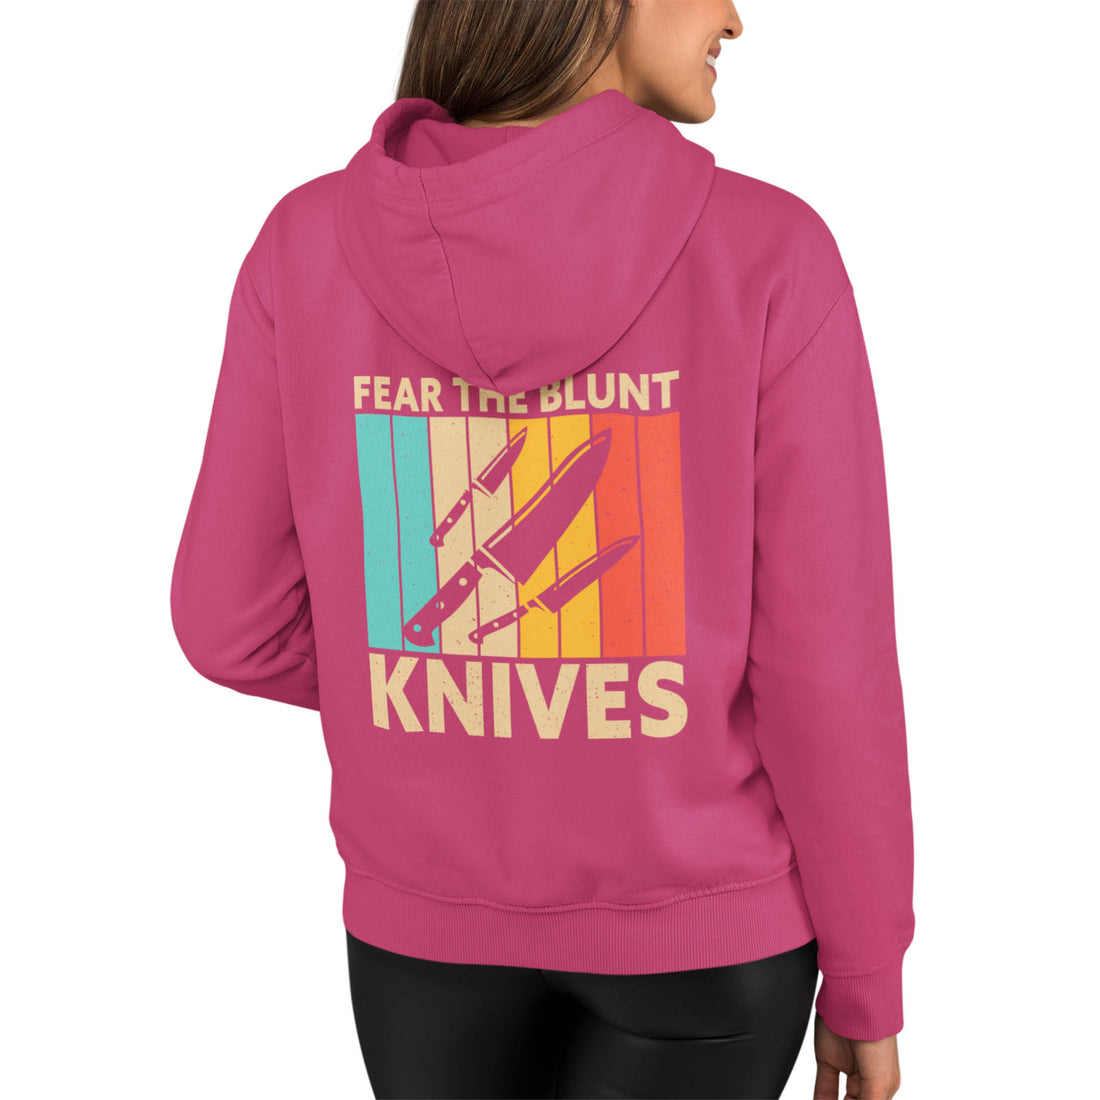 Fear the Blunt Knives